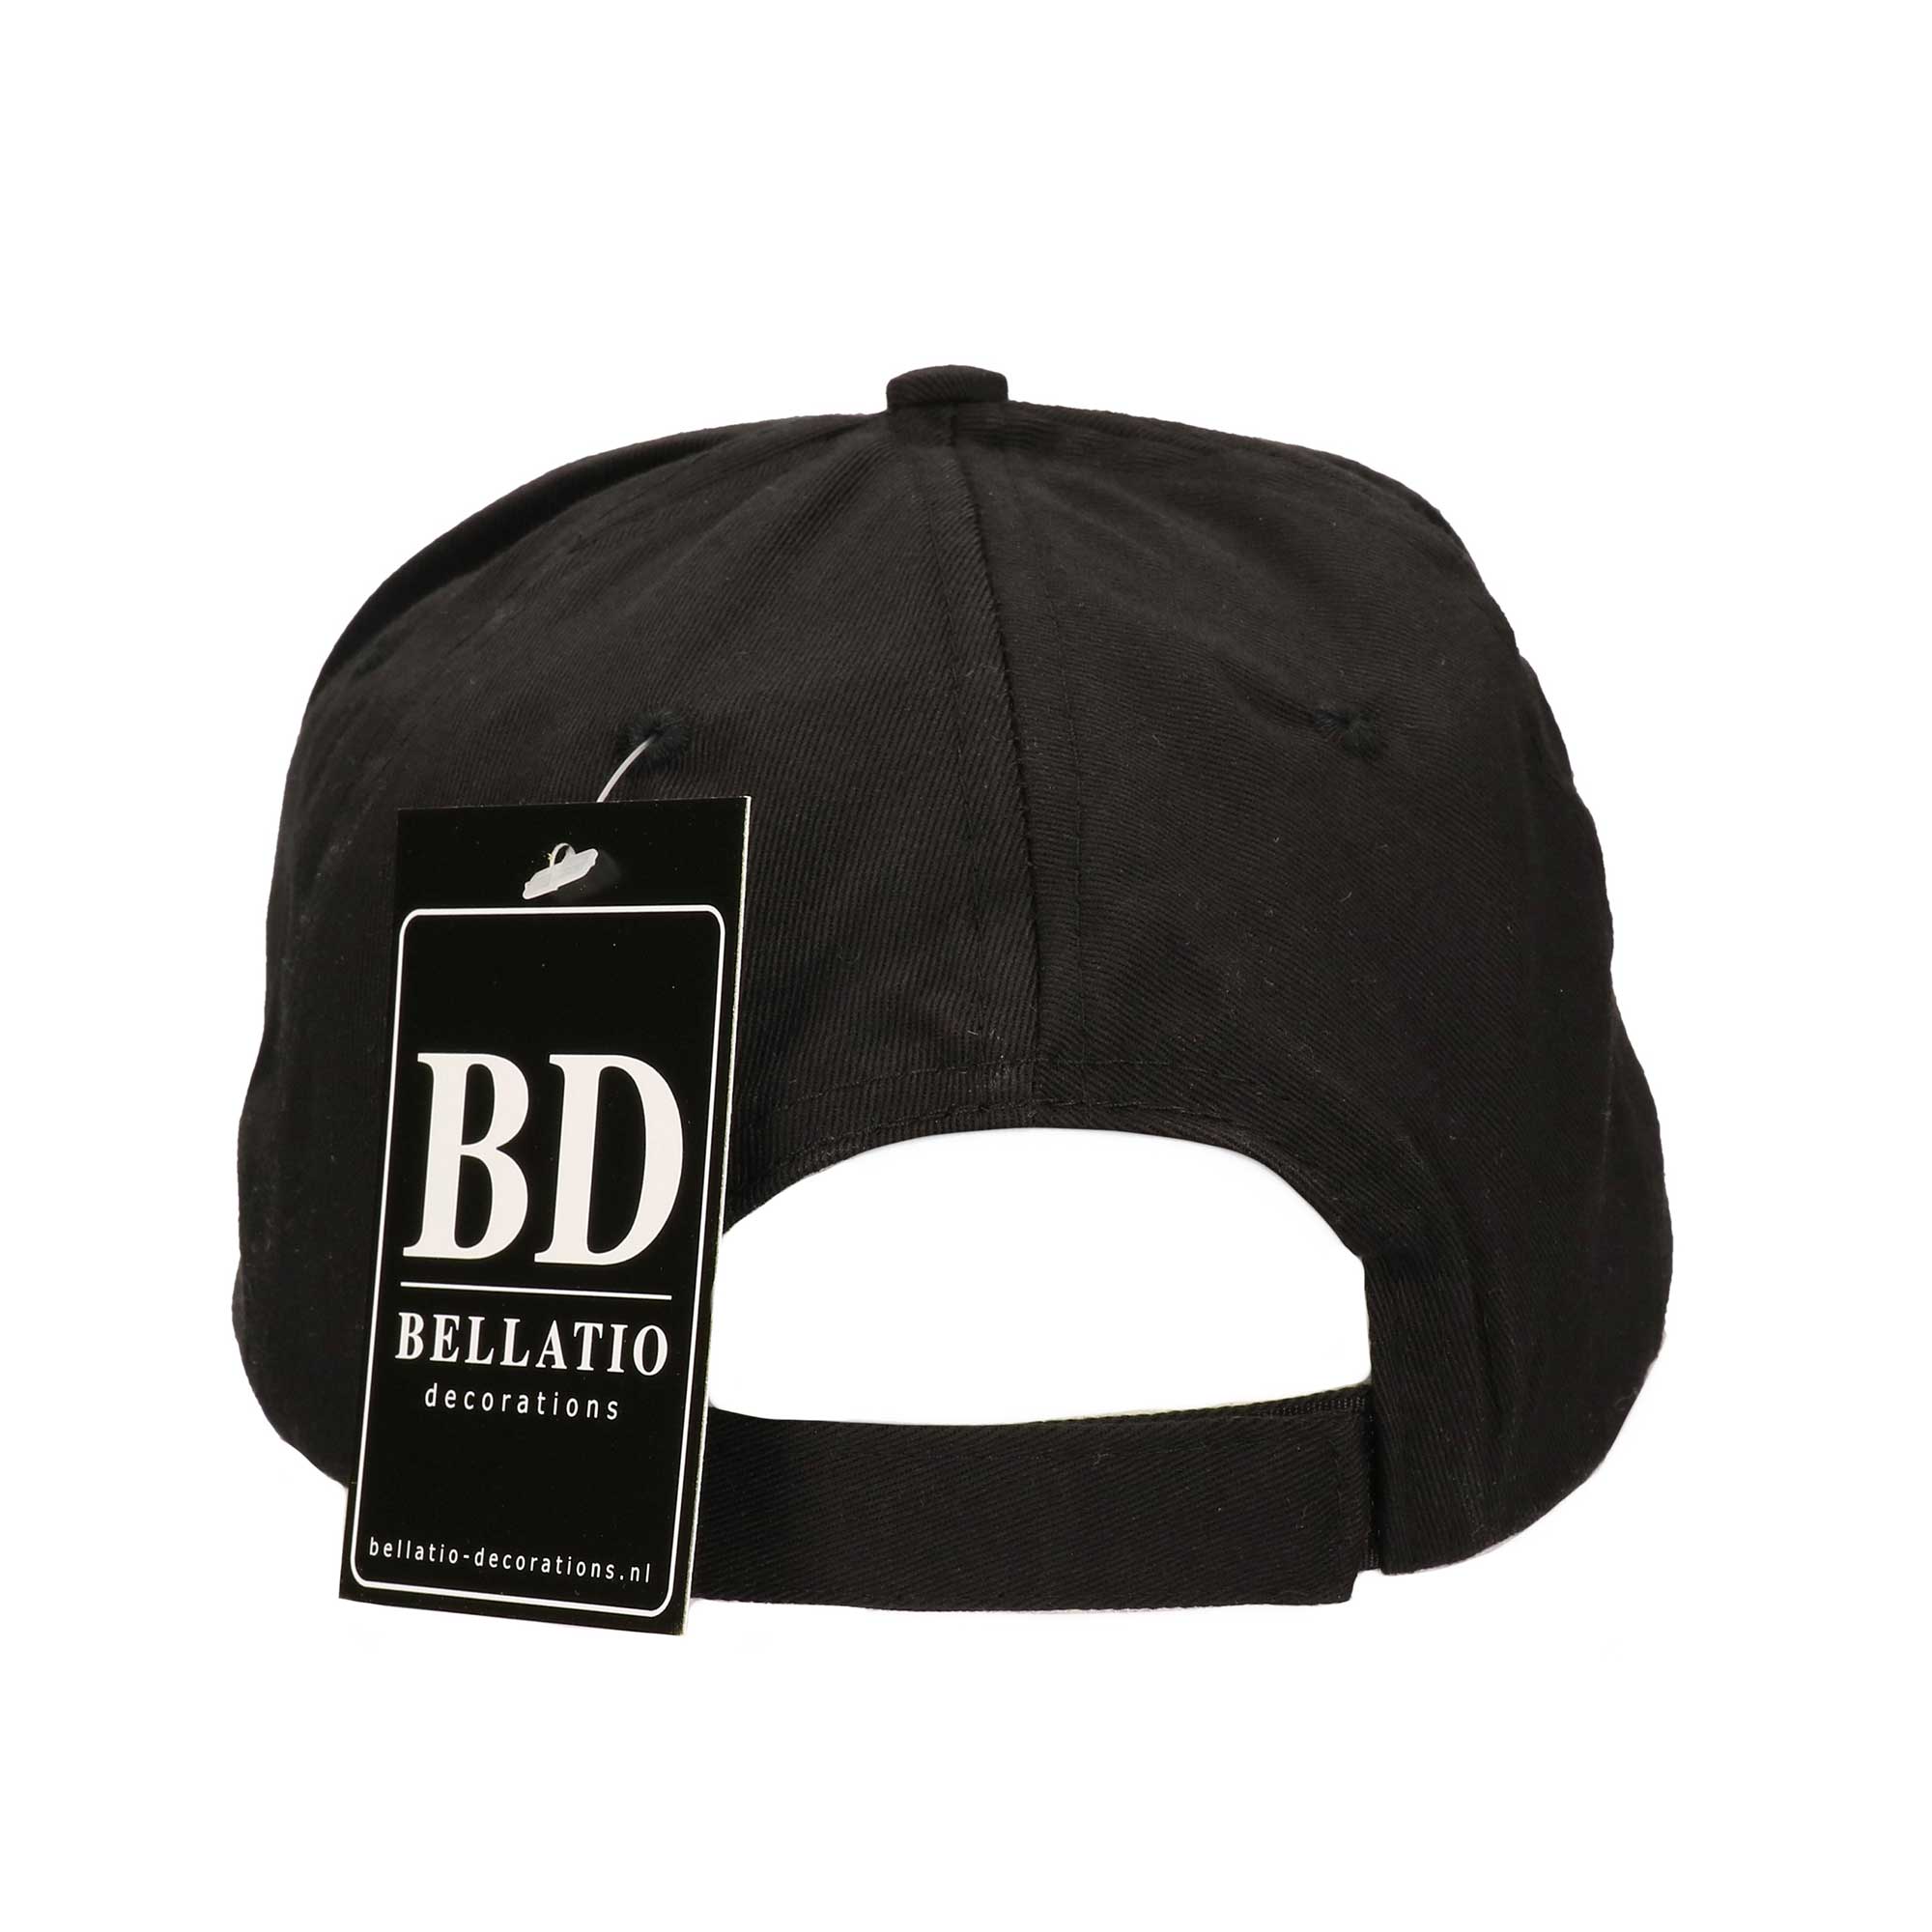 Black police cap for adults